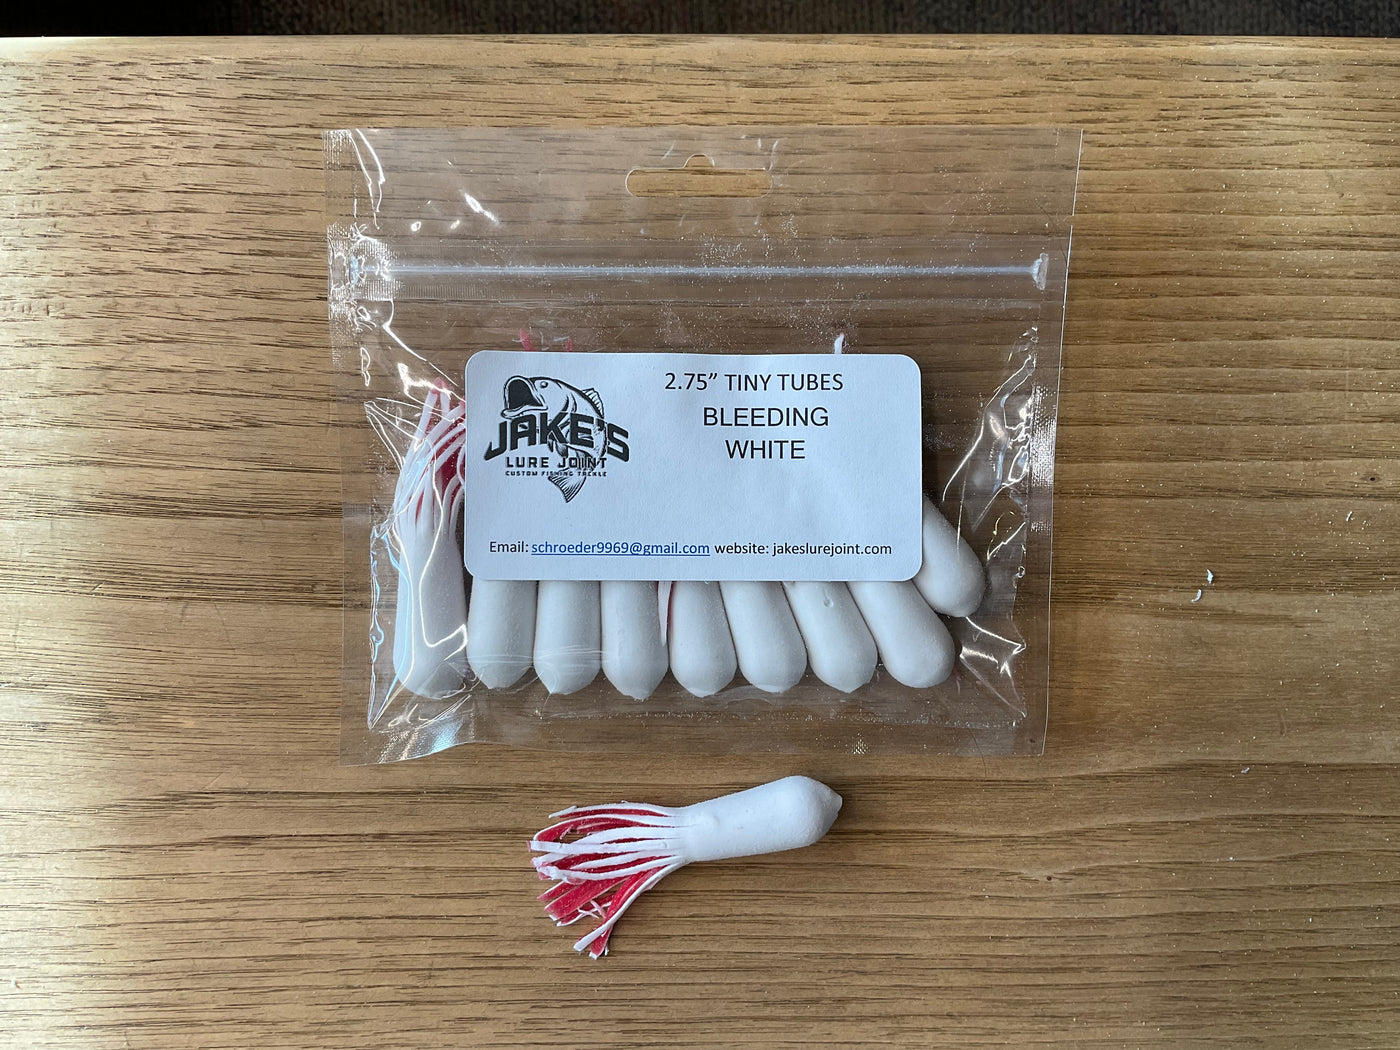 Jake’s Lure Joint 2.75” Tiny Tubes